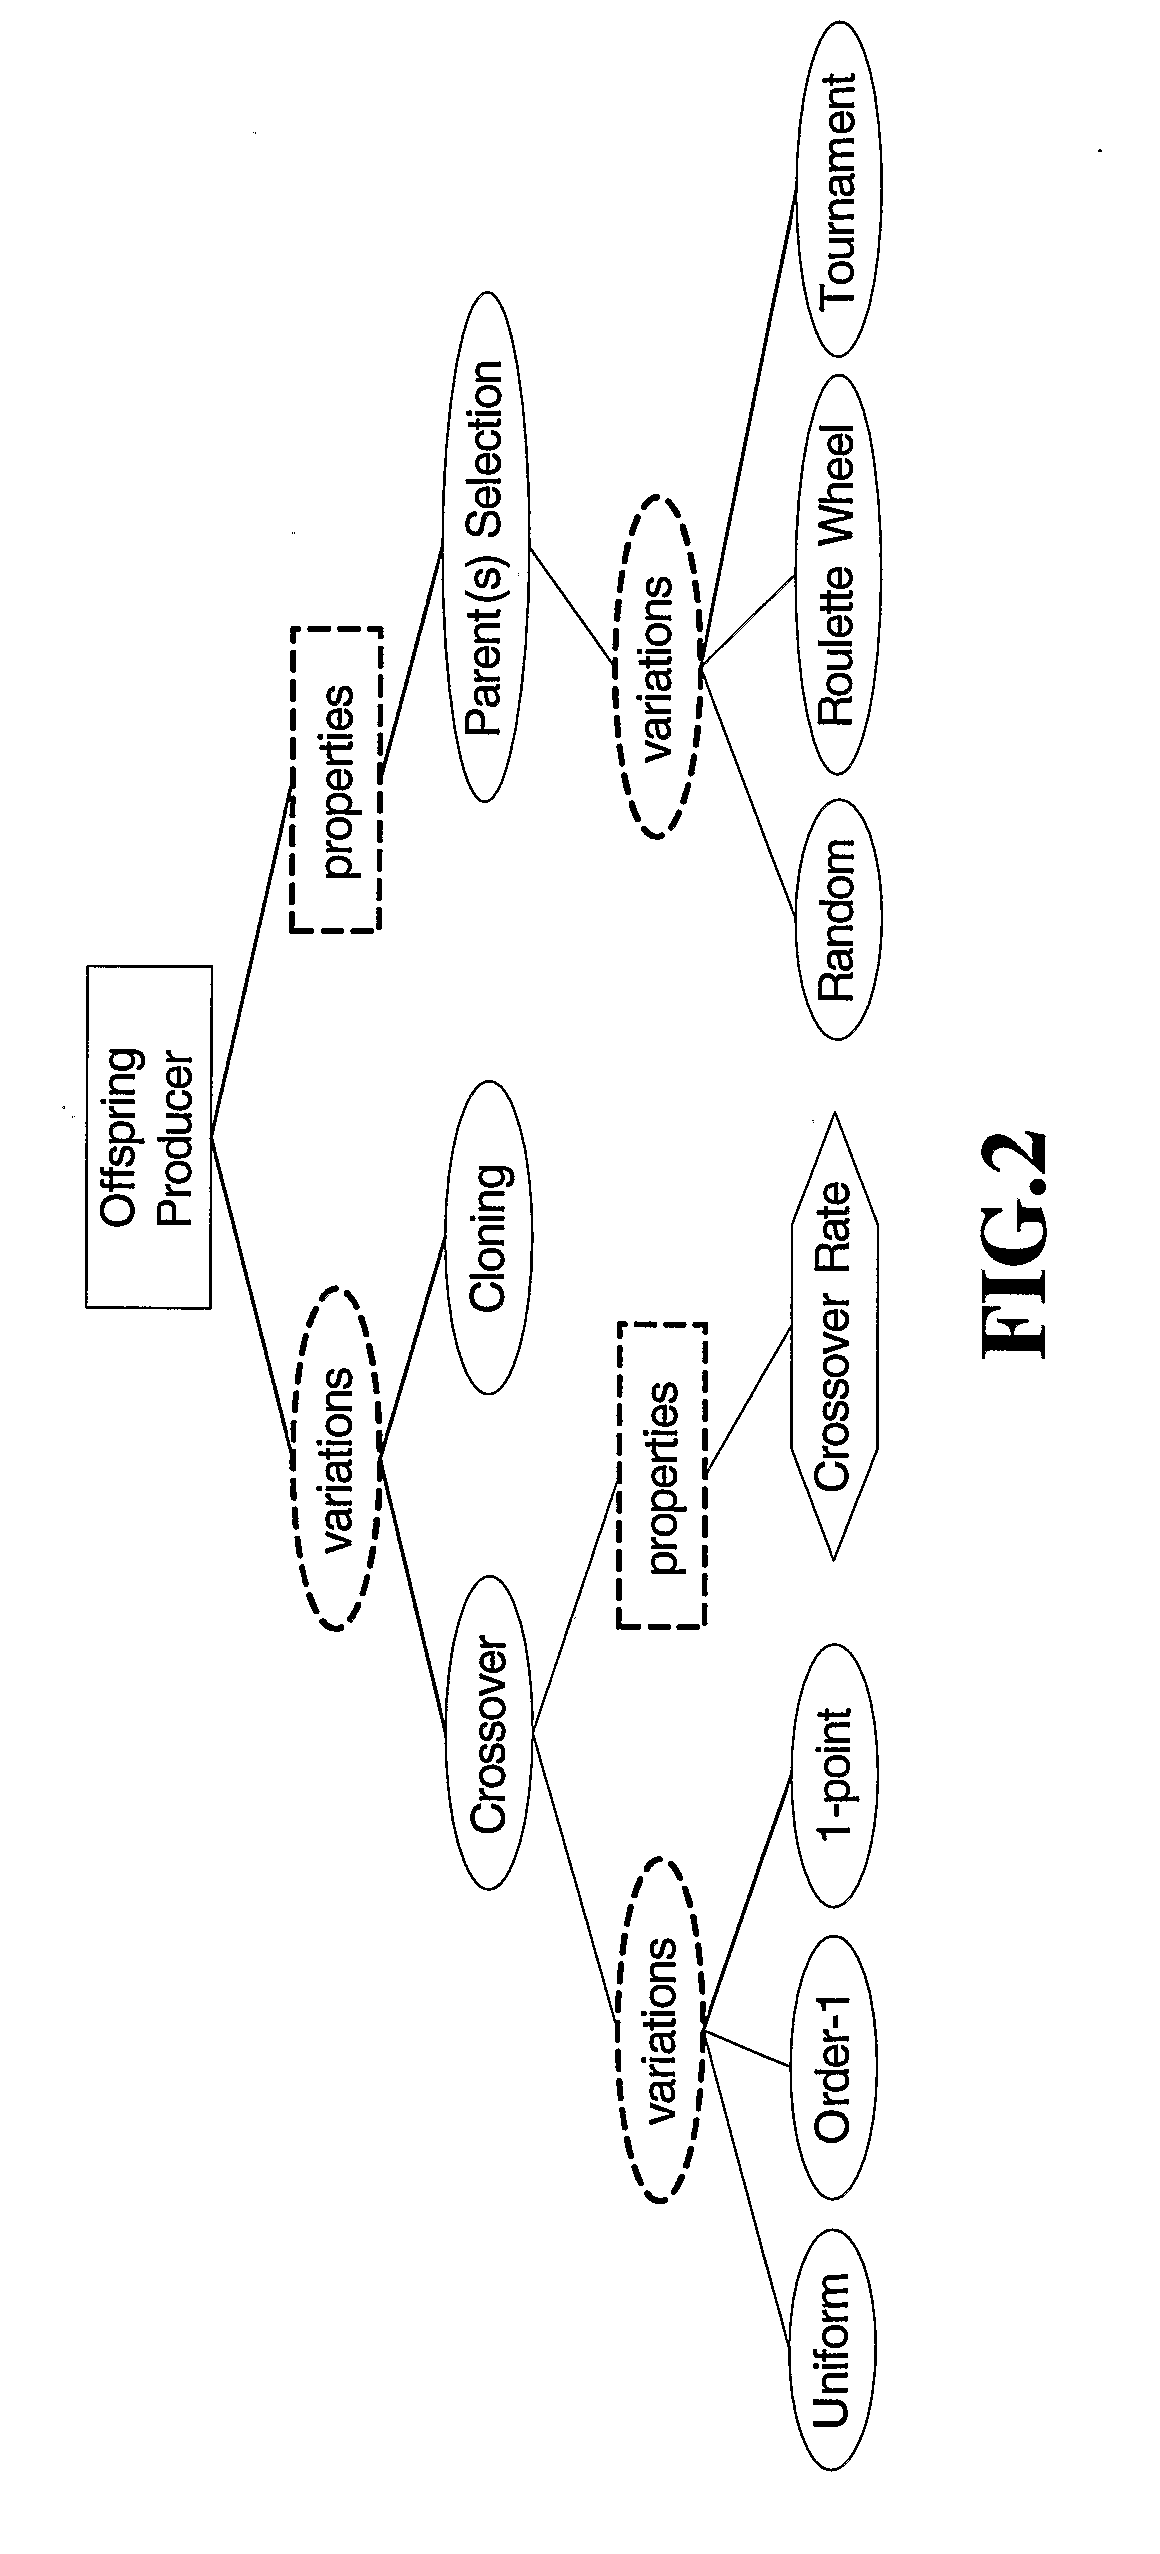 Method and apparatus for automatic configuration of meta-heuristic algorithms in a problem solving environment